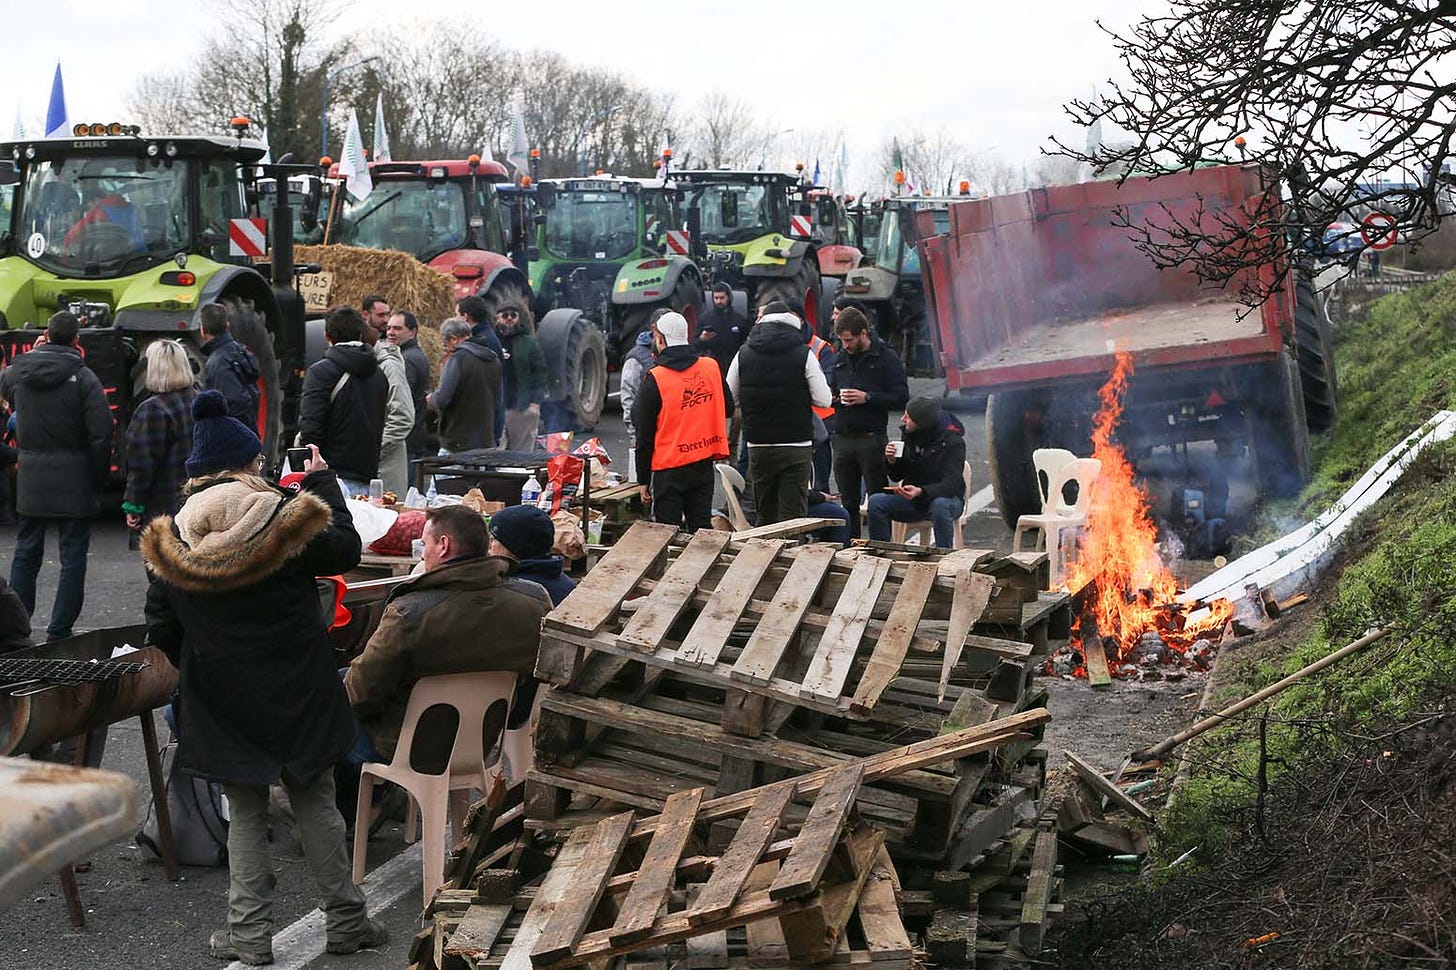 Tractors, bales of hay, wooden shipping pallettes being burned in an open fire, people standing around or sitting on folding chairs, all on a road.